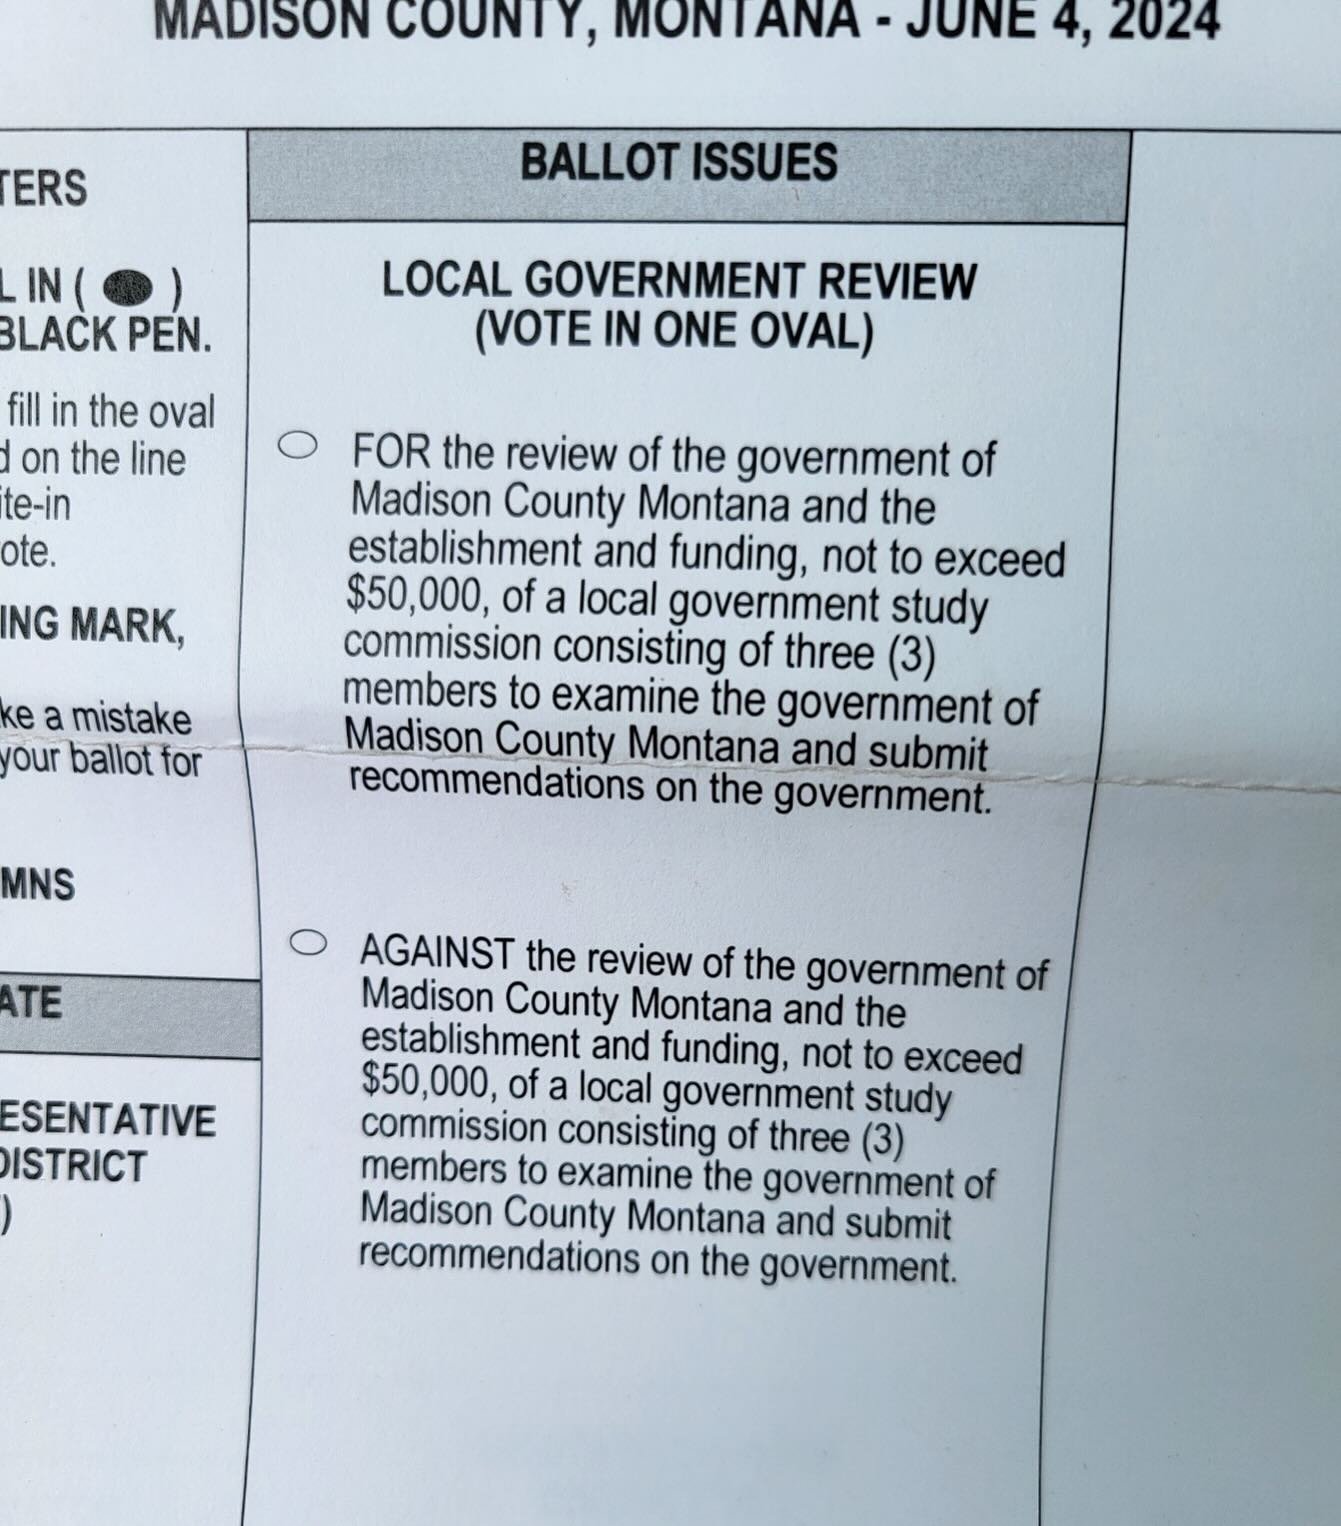 Lookie, lookie what we have here on the June 4th ballot in Madison County, Montana! We&rsquo;ve known all along this place was corrupt as the summer day is long. What they did to us is just a symptom of a much bigger problem. Let&rsquo;s hope the peo